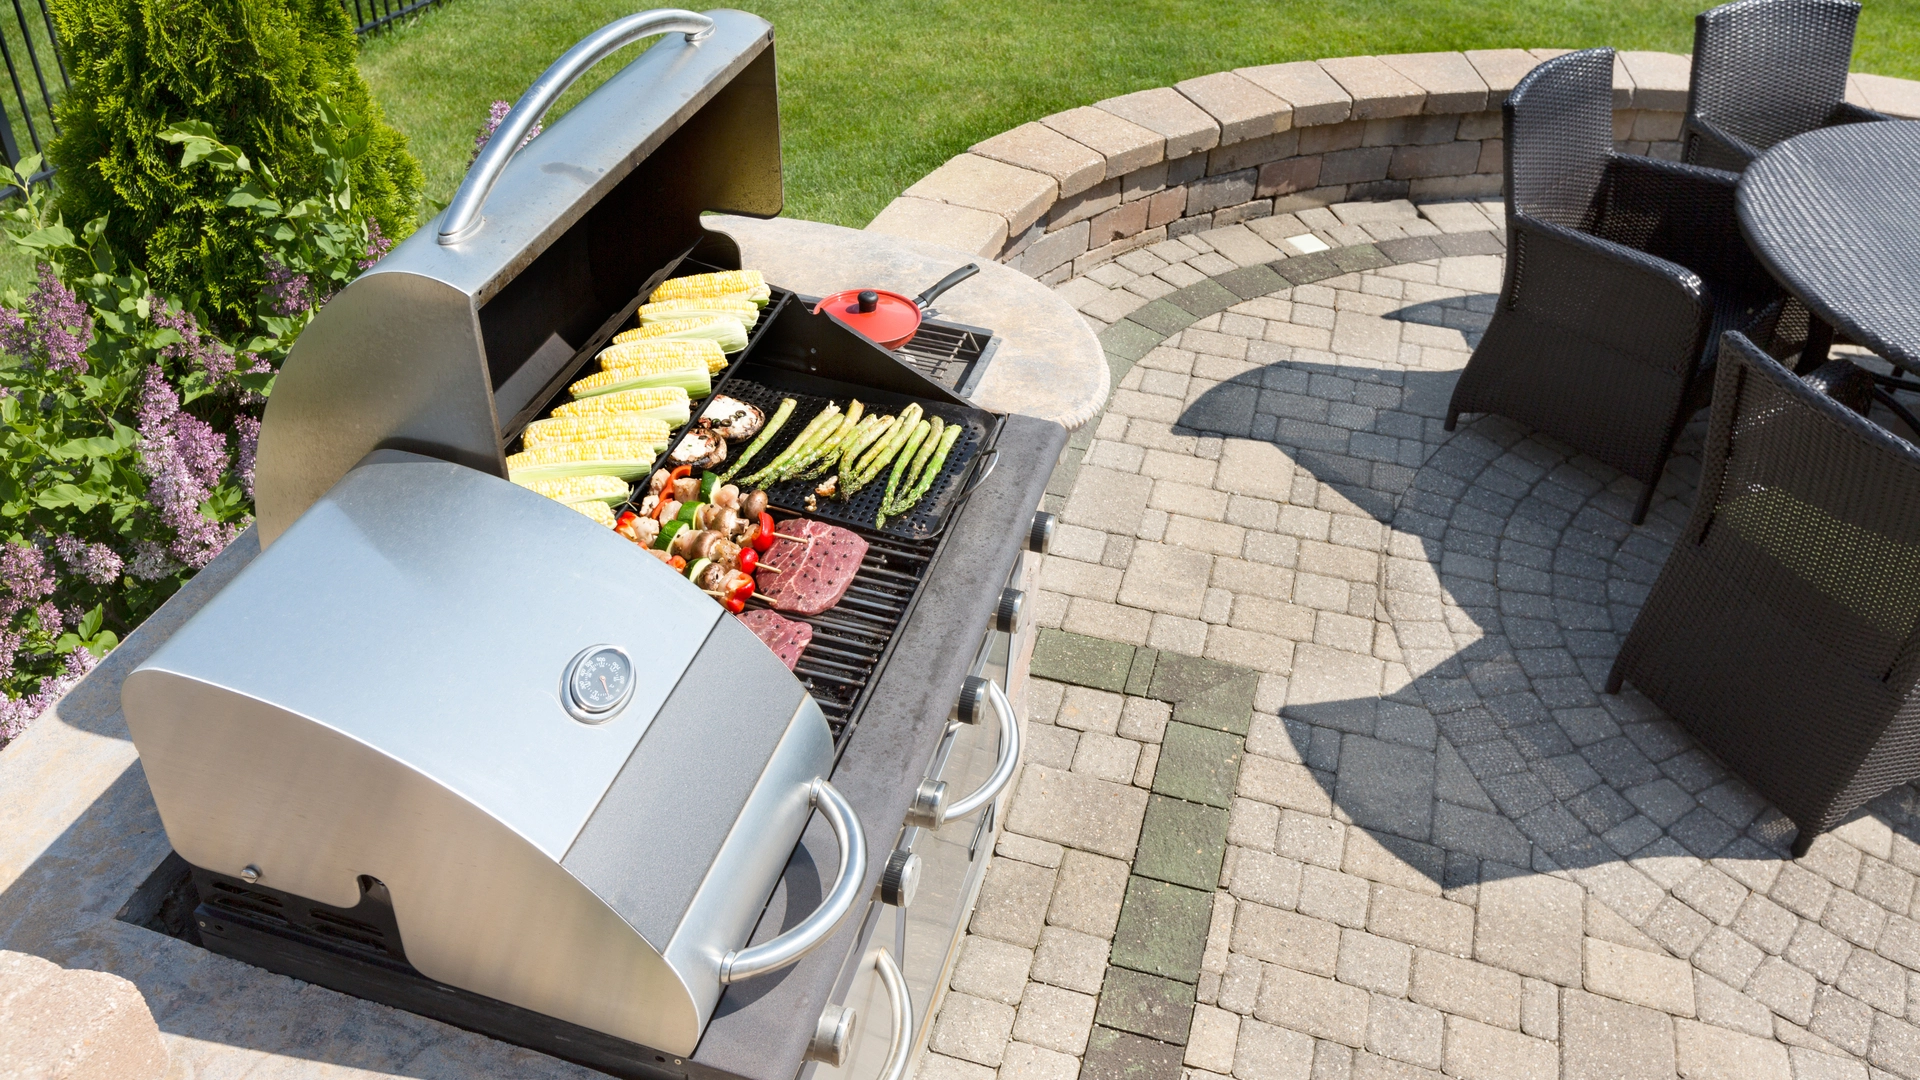 Designing an Outdoor Kitchen? Consider Adding These 5 Amenities to It